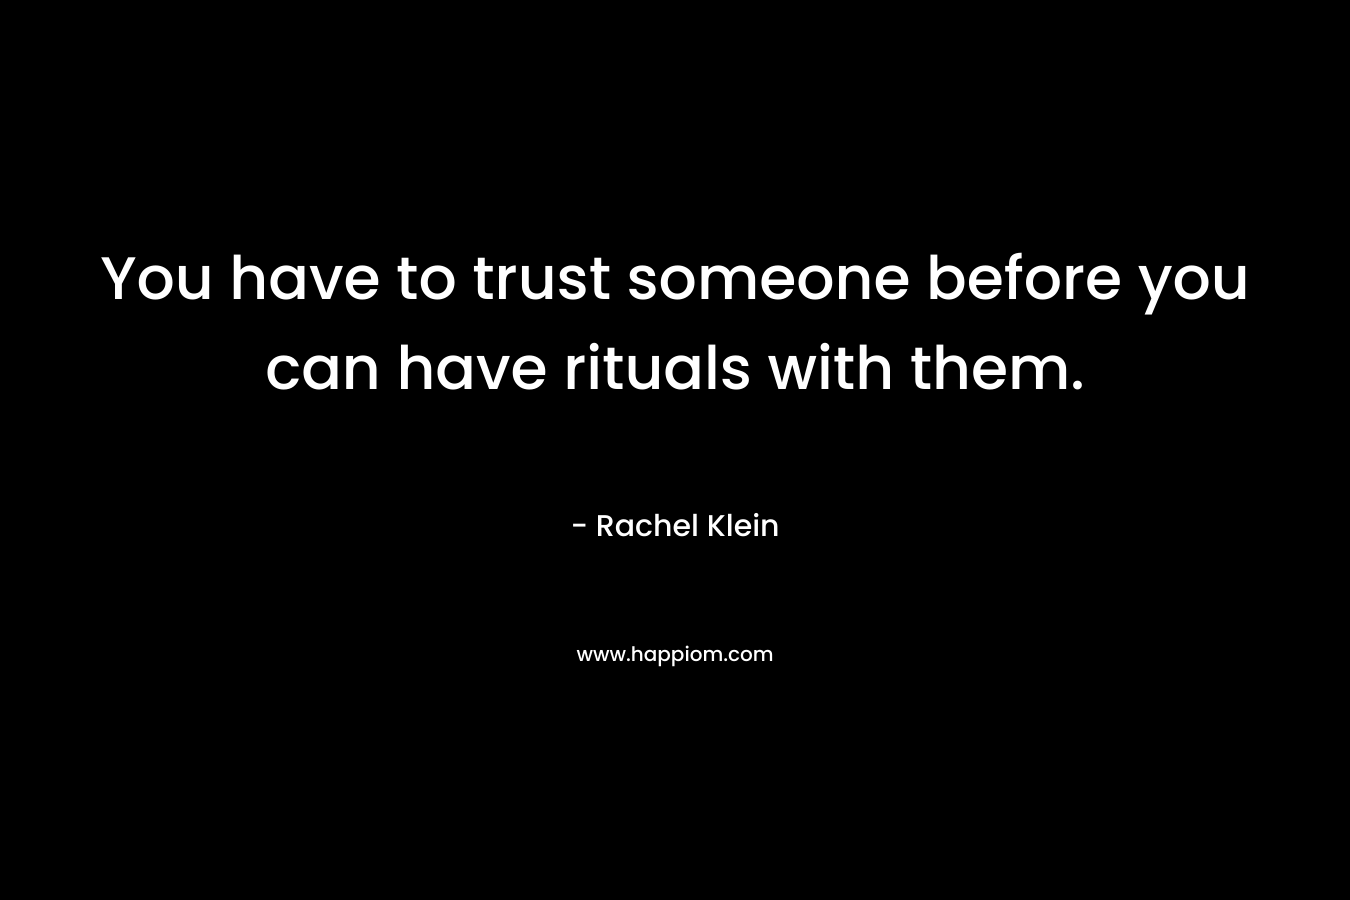 You have to trust someone before you can have rituals with them. – Rachel Klein